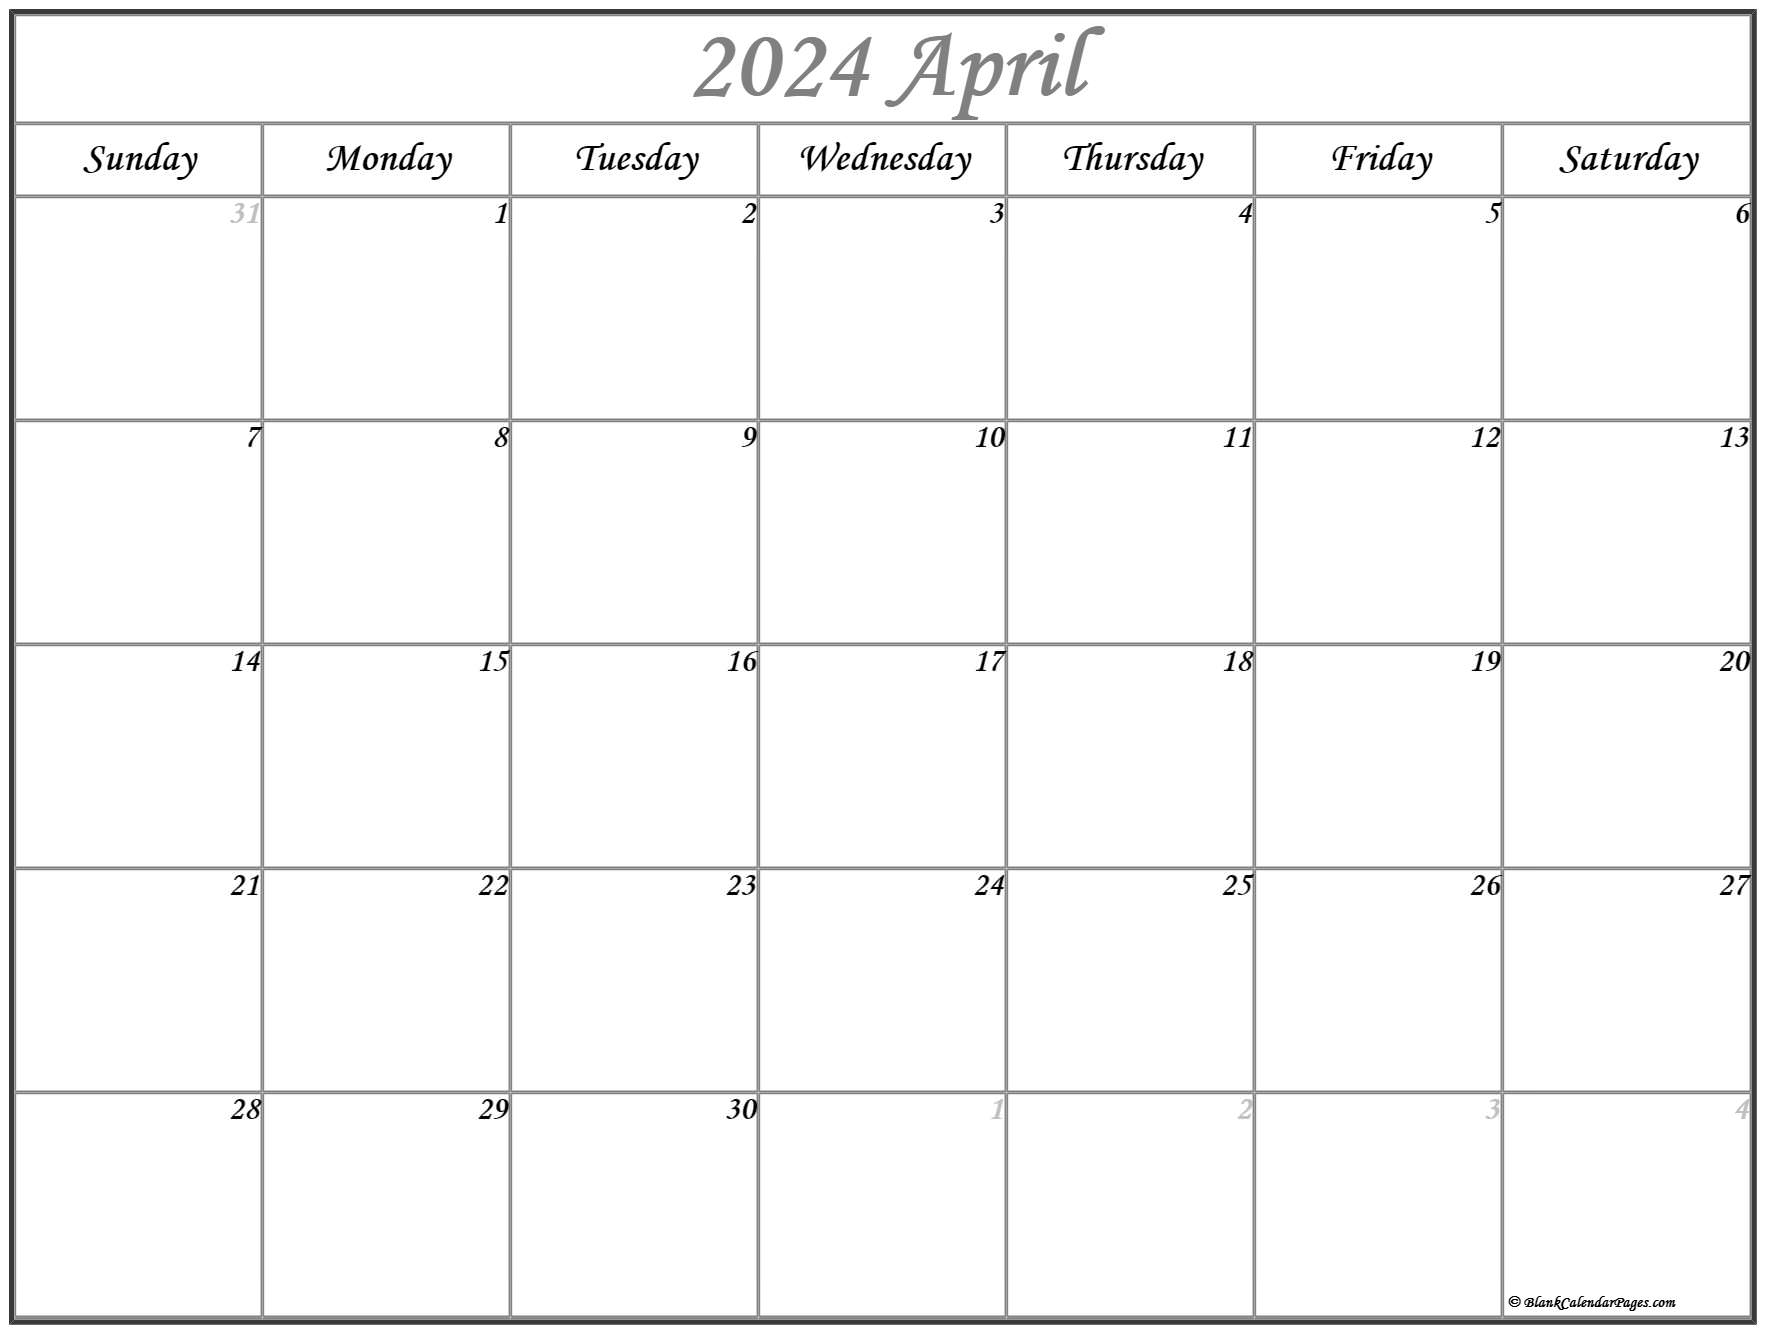 Featured image of post April 2021 Calendar Blankcalendarpages.com : Blank monthly calendar for april 2021 on one page.